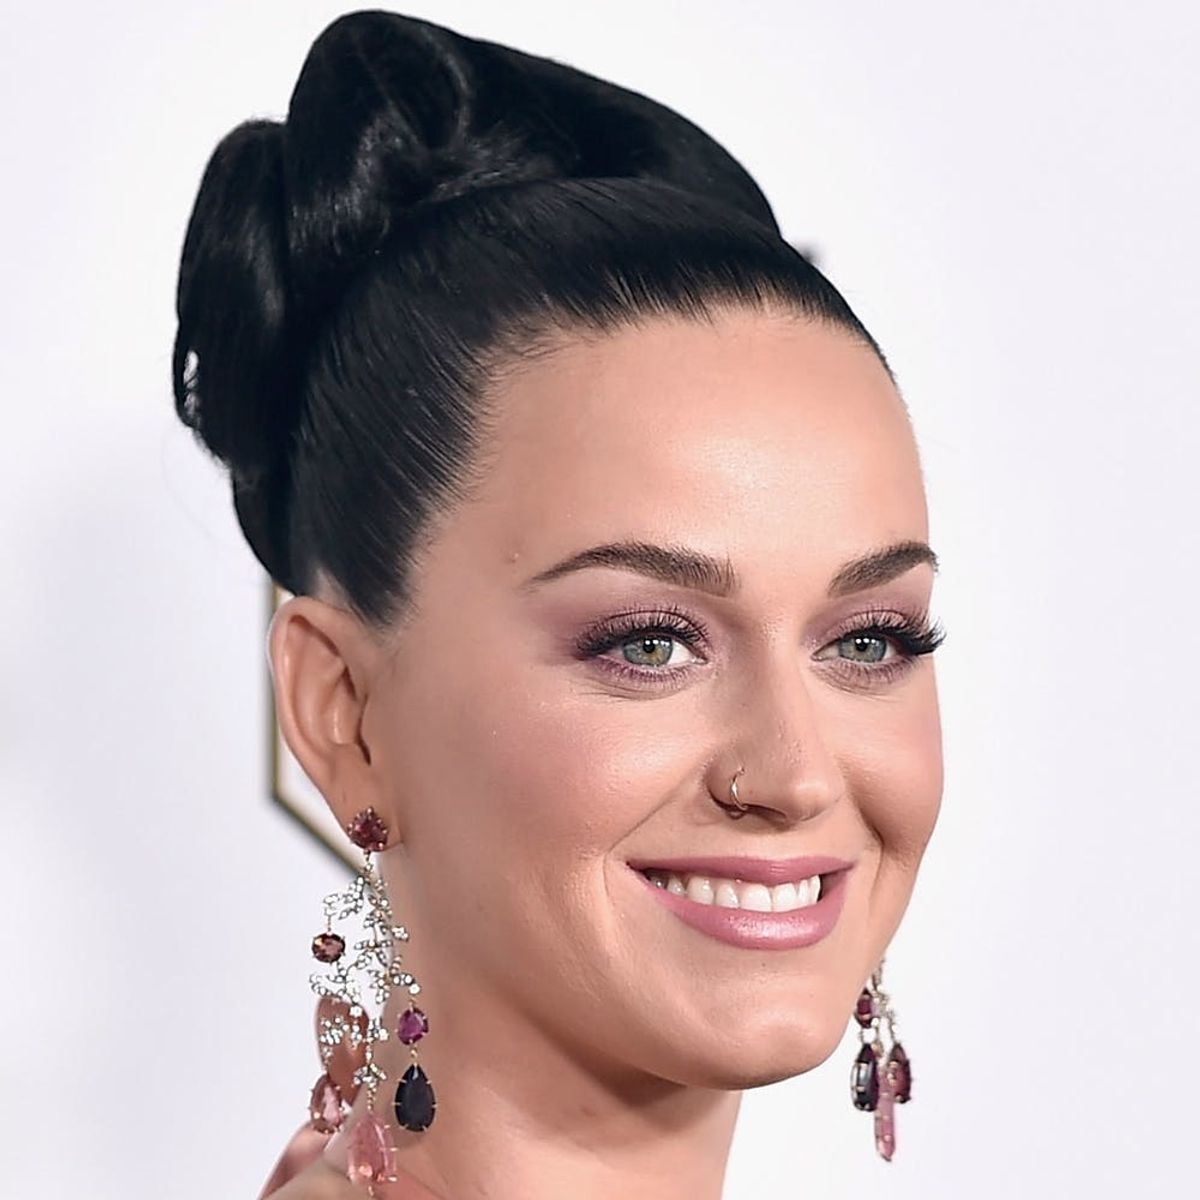 Katy Perry Just Dropped Some Major Hints About Kids in Her Future